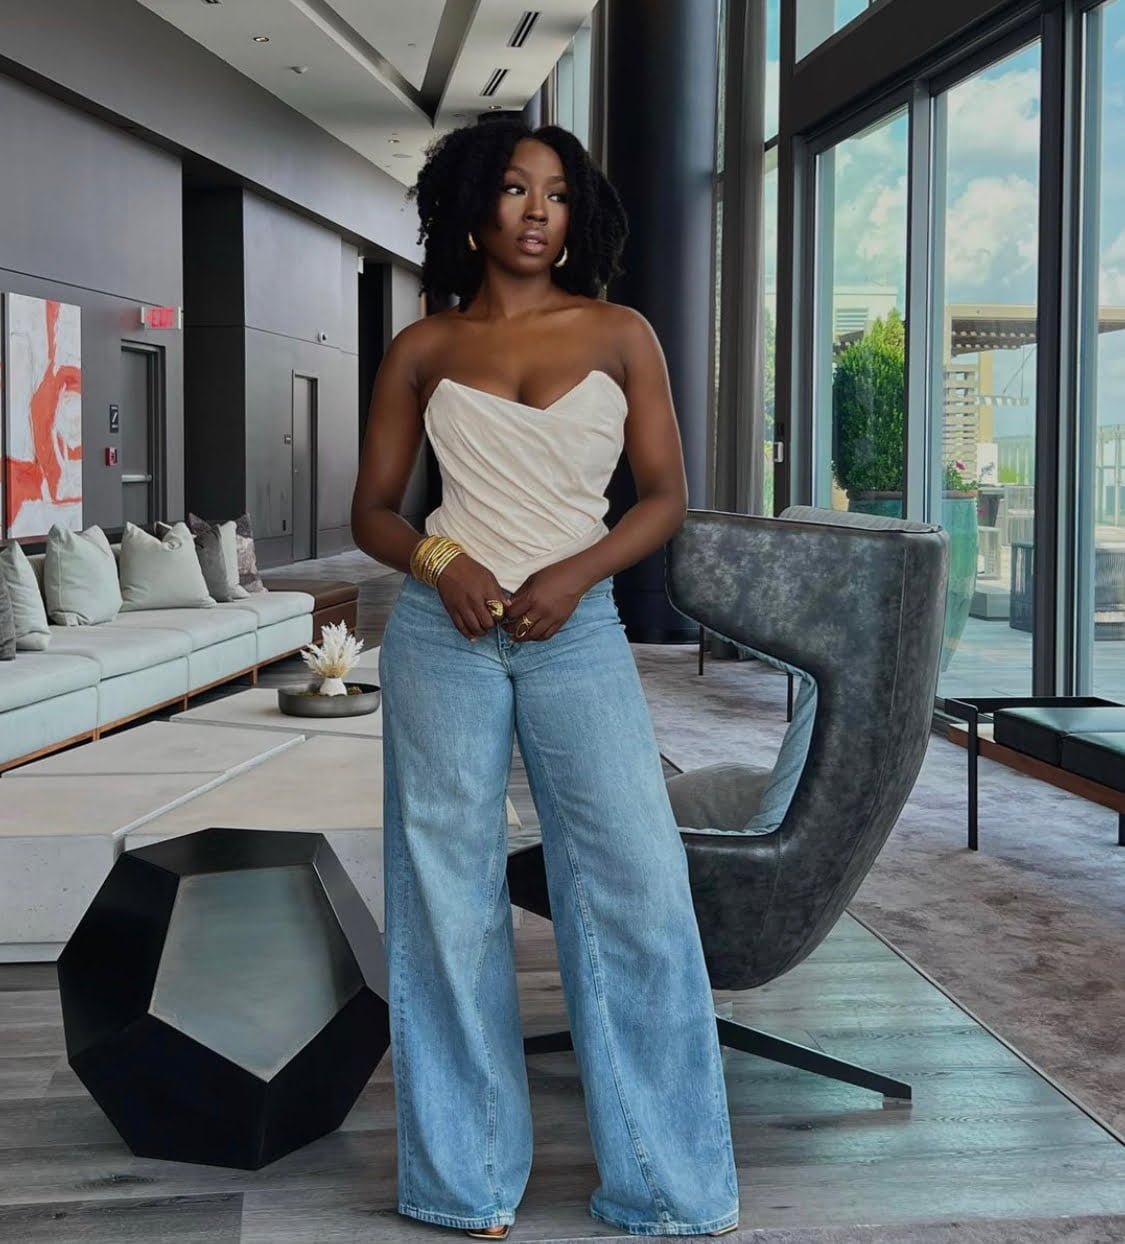 Pro at styling denim: Beverly Naya exudes class in a sleeveless white top, wide-legged jean trousers, and a captivating look.